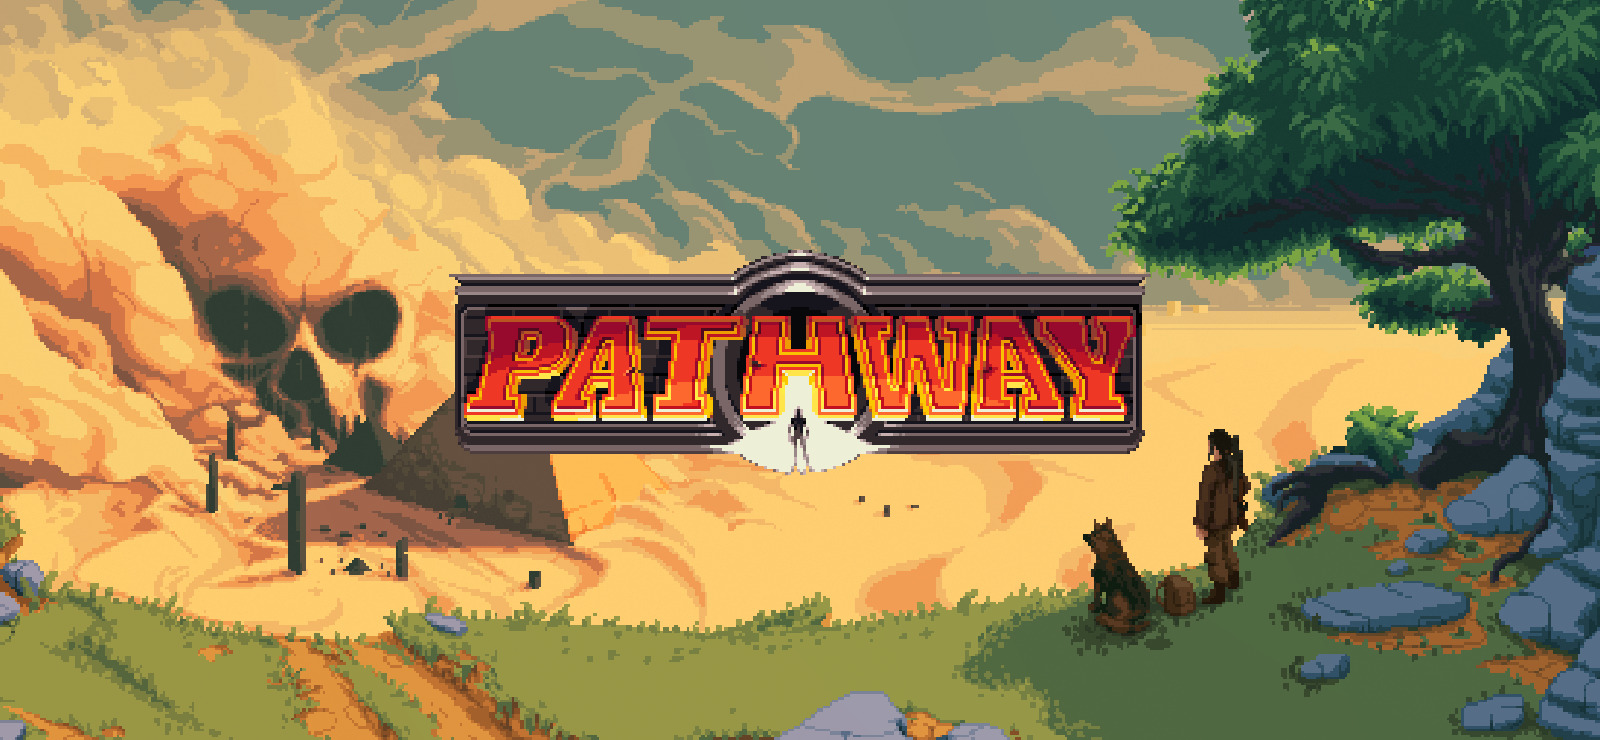 Pathway for windows download free